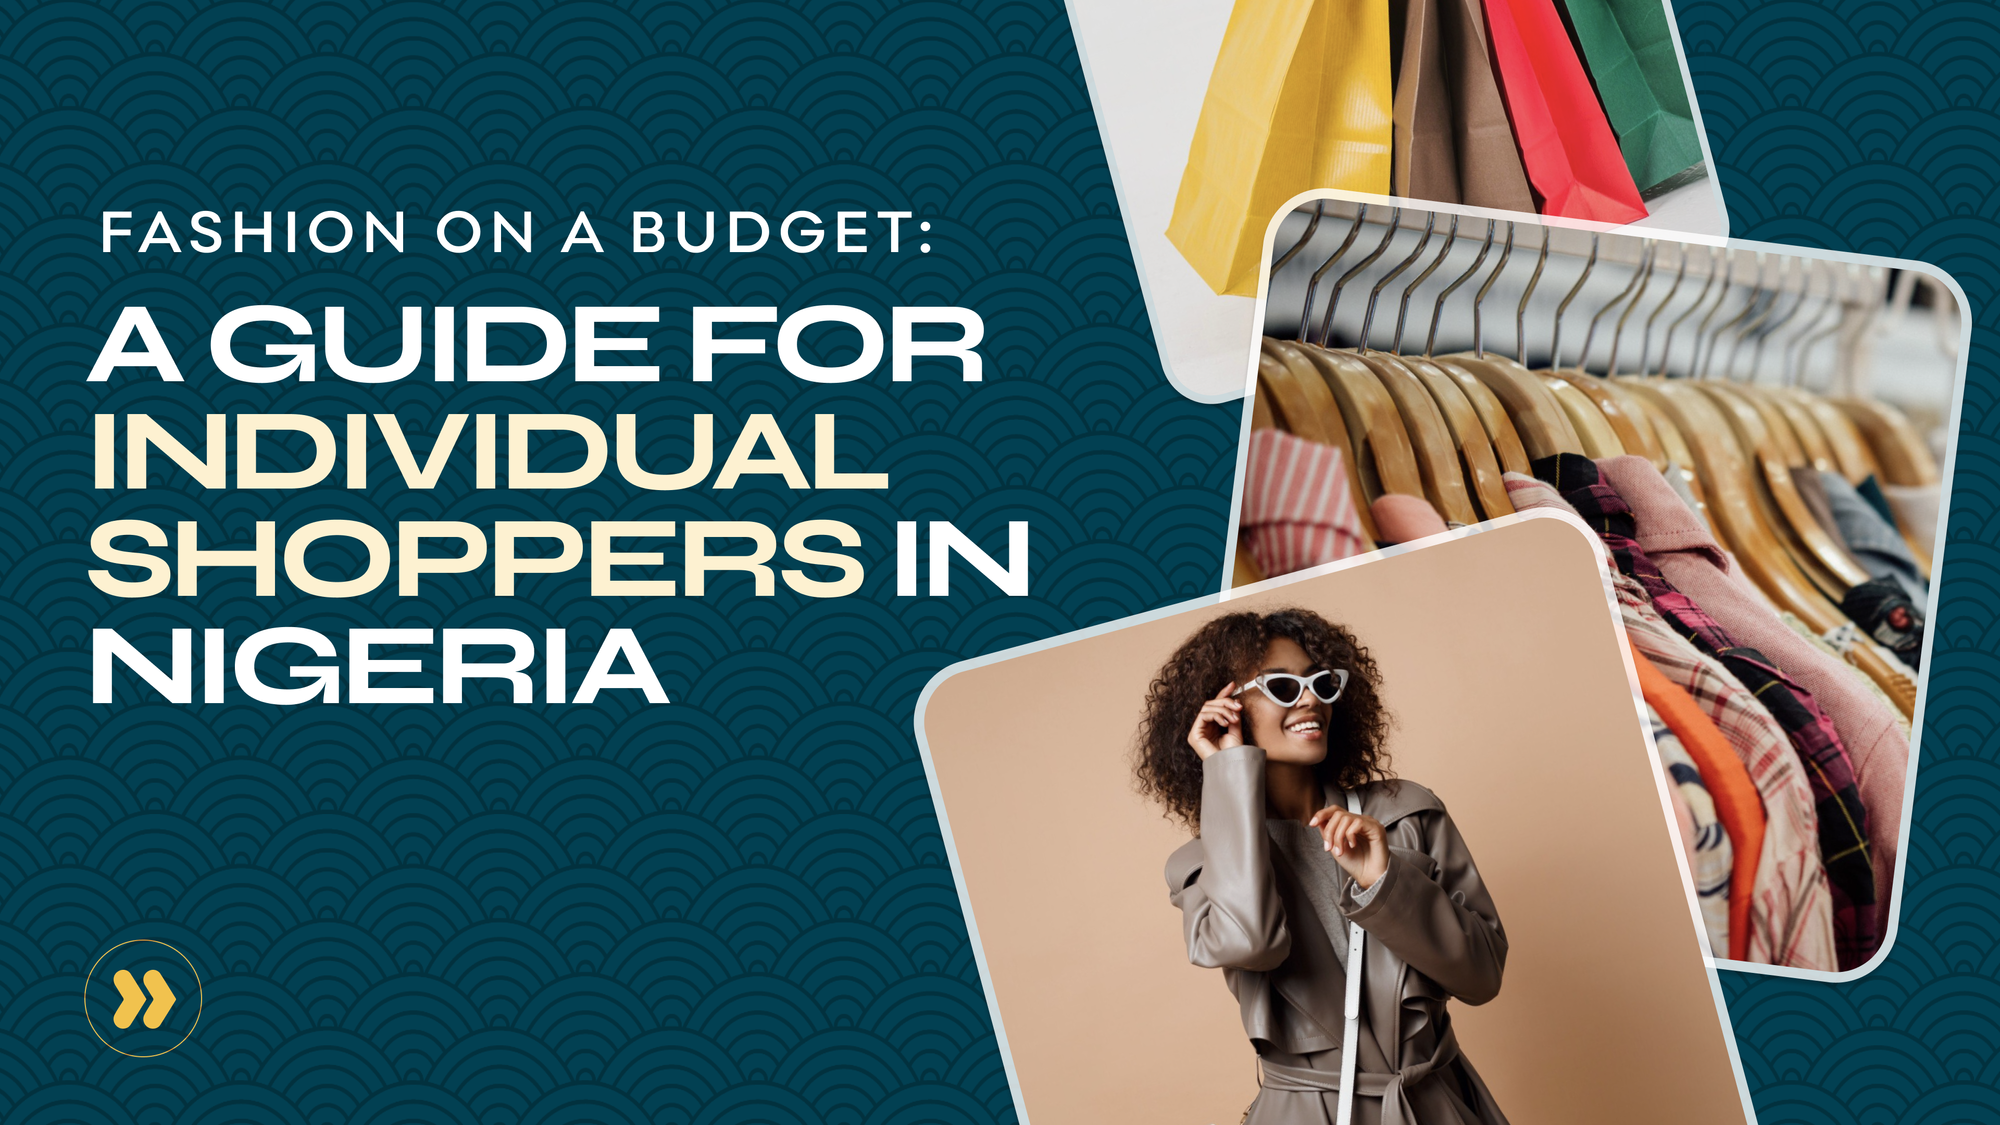 Fashion on a Budget: A Guide for Individual Shoppers in Nigeria